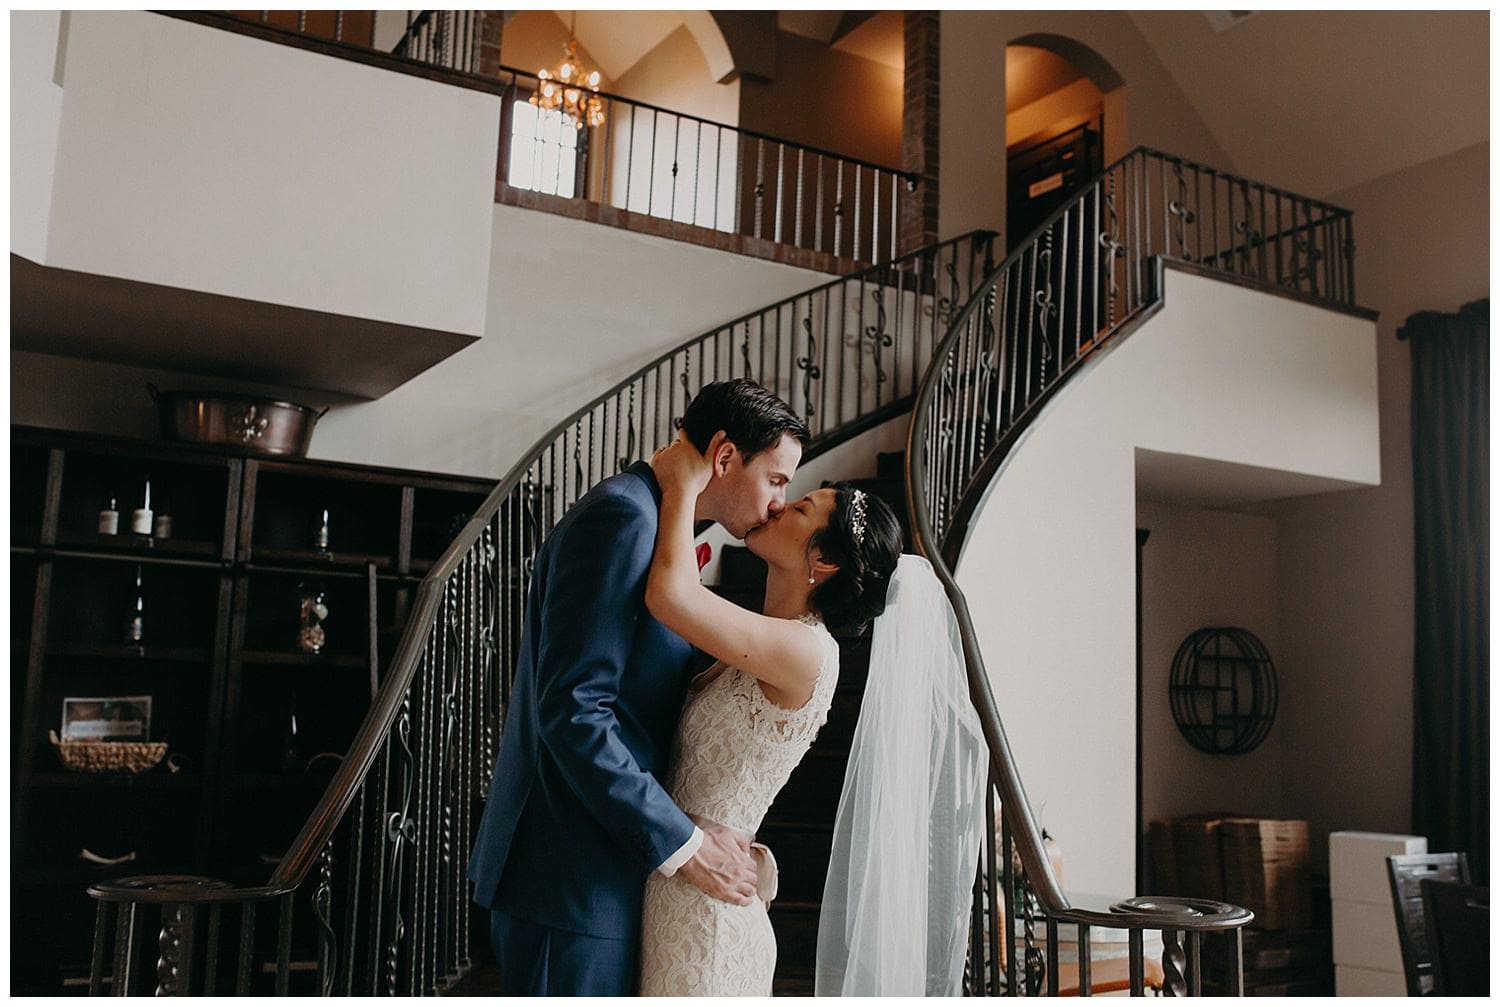 cute couple kissing at base of staircase beacon hill wedding